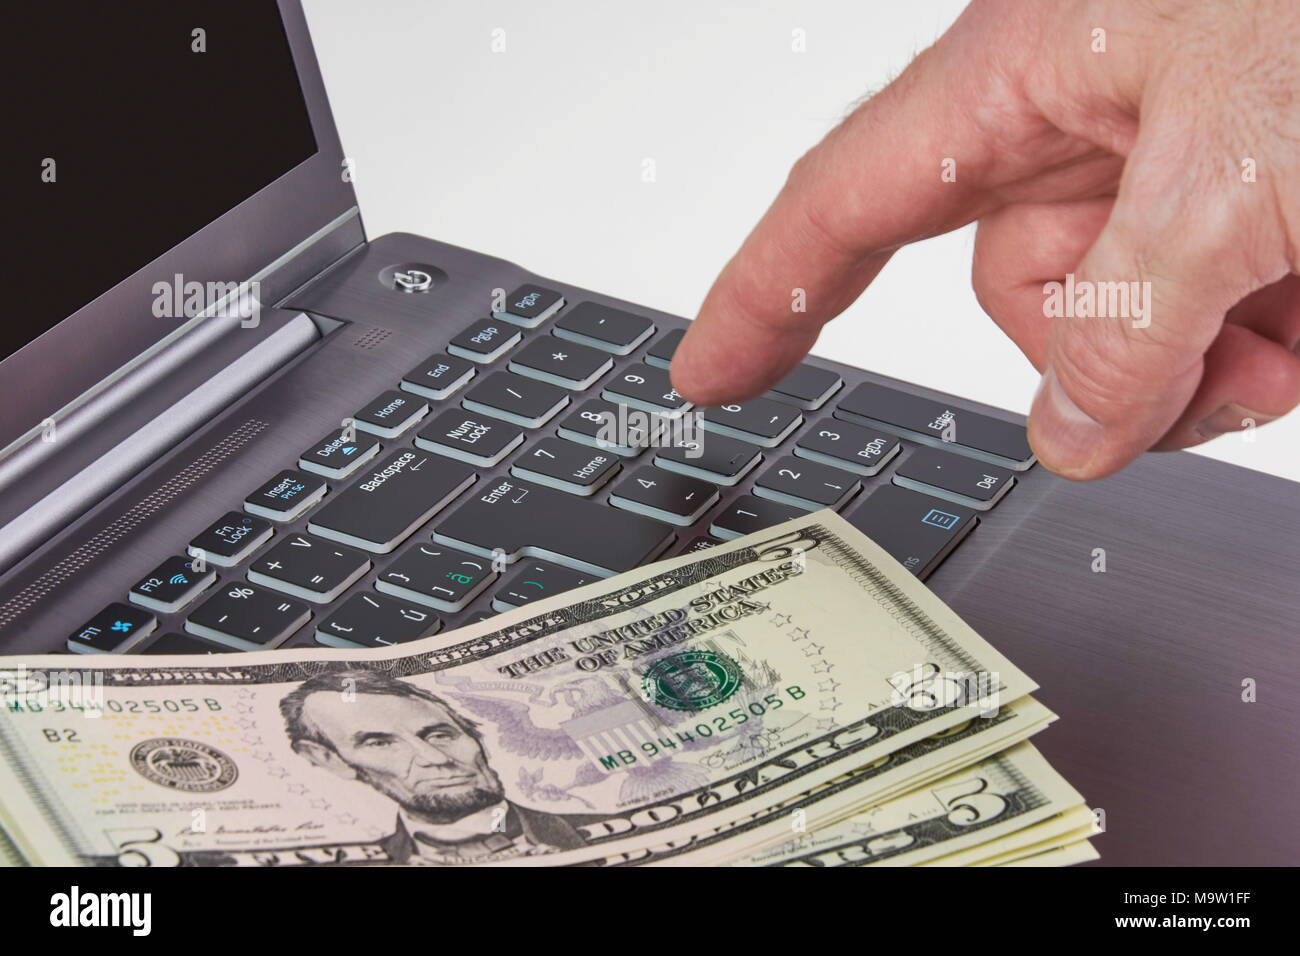 Silver laptop with dollar bills and hands typing on a keyboard, on white background Stock Photo